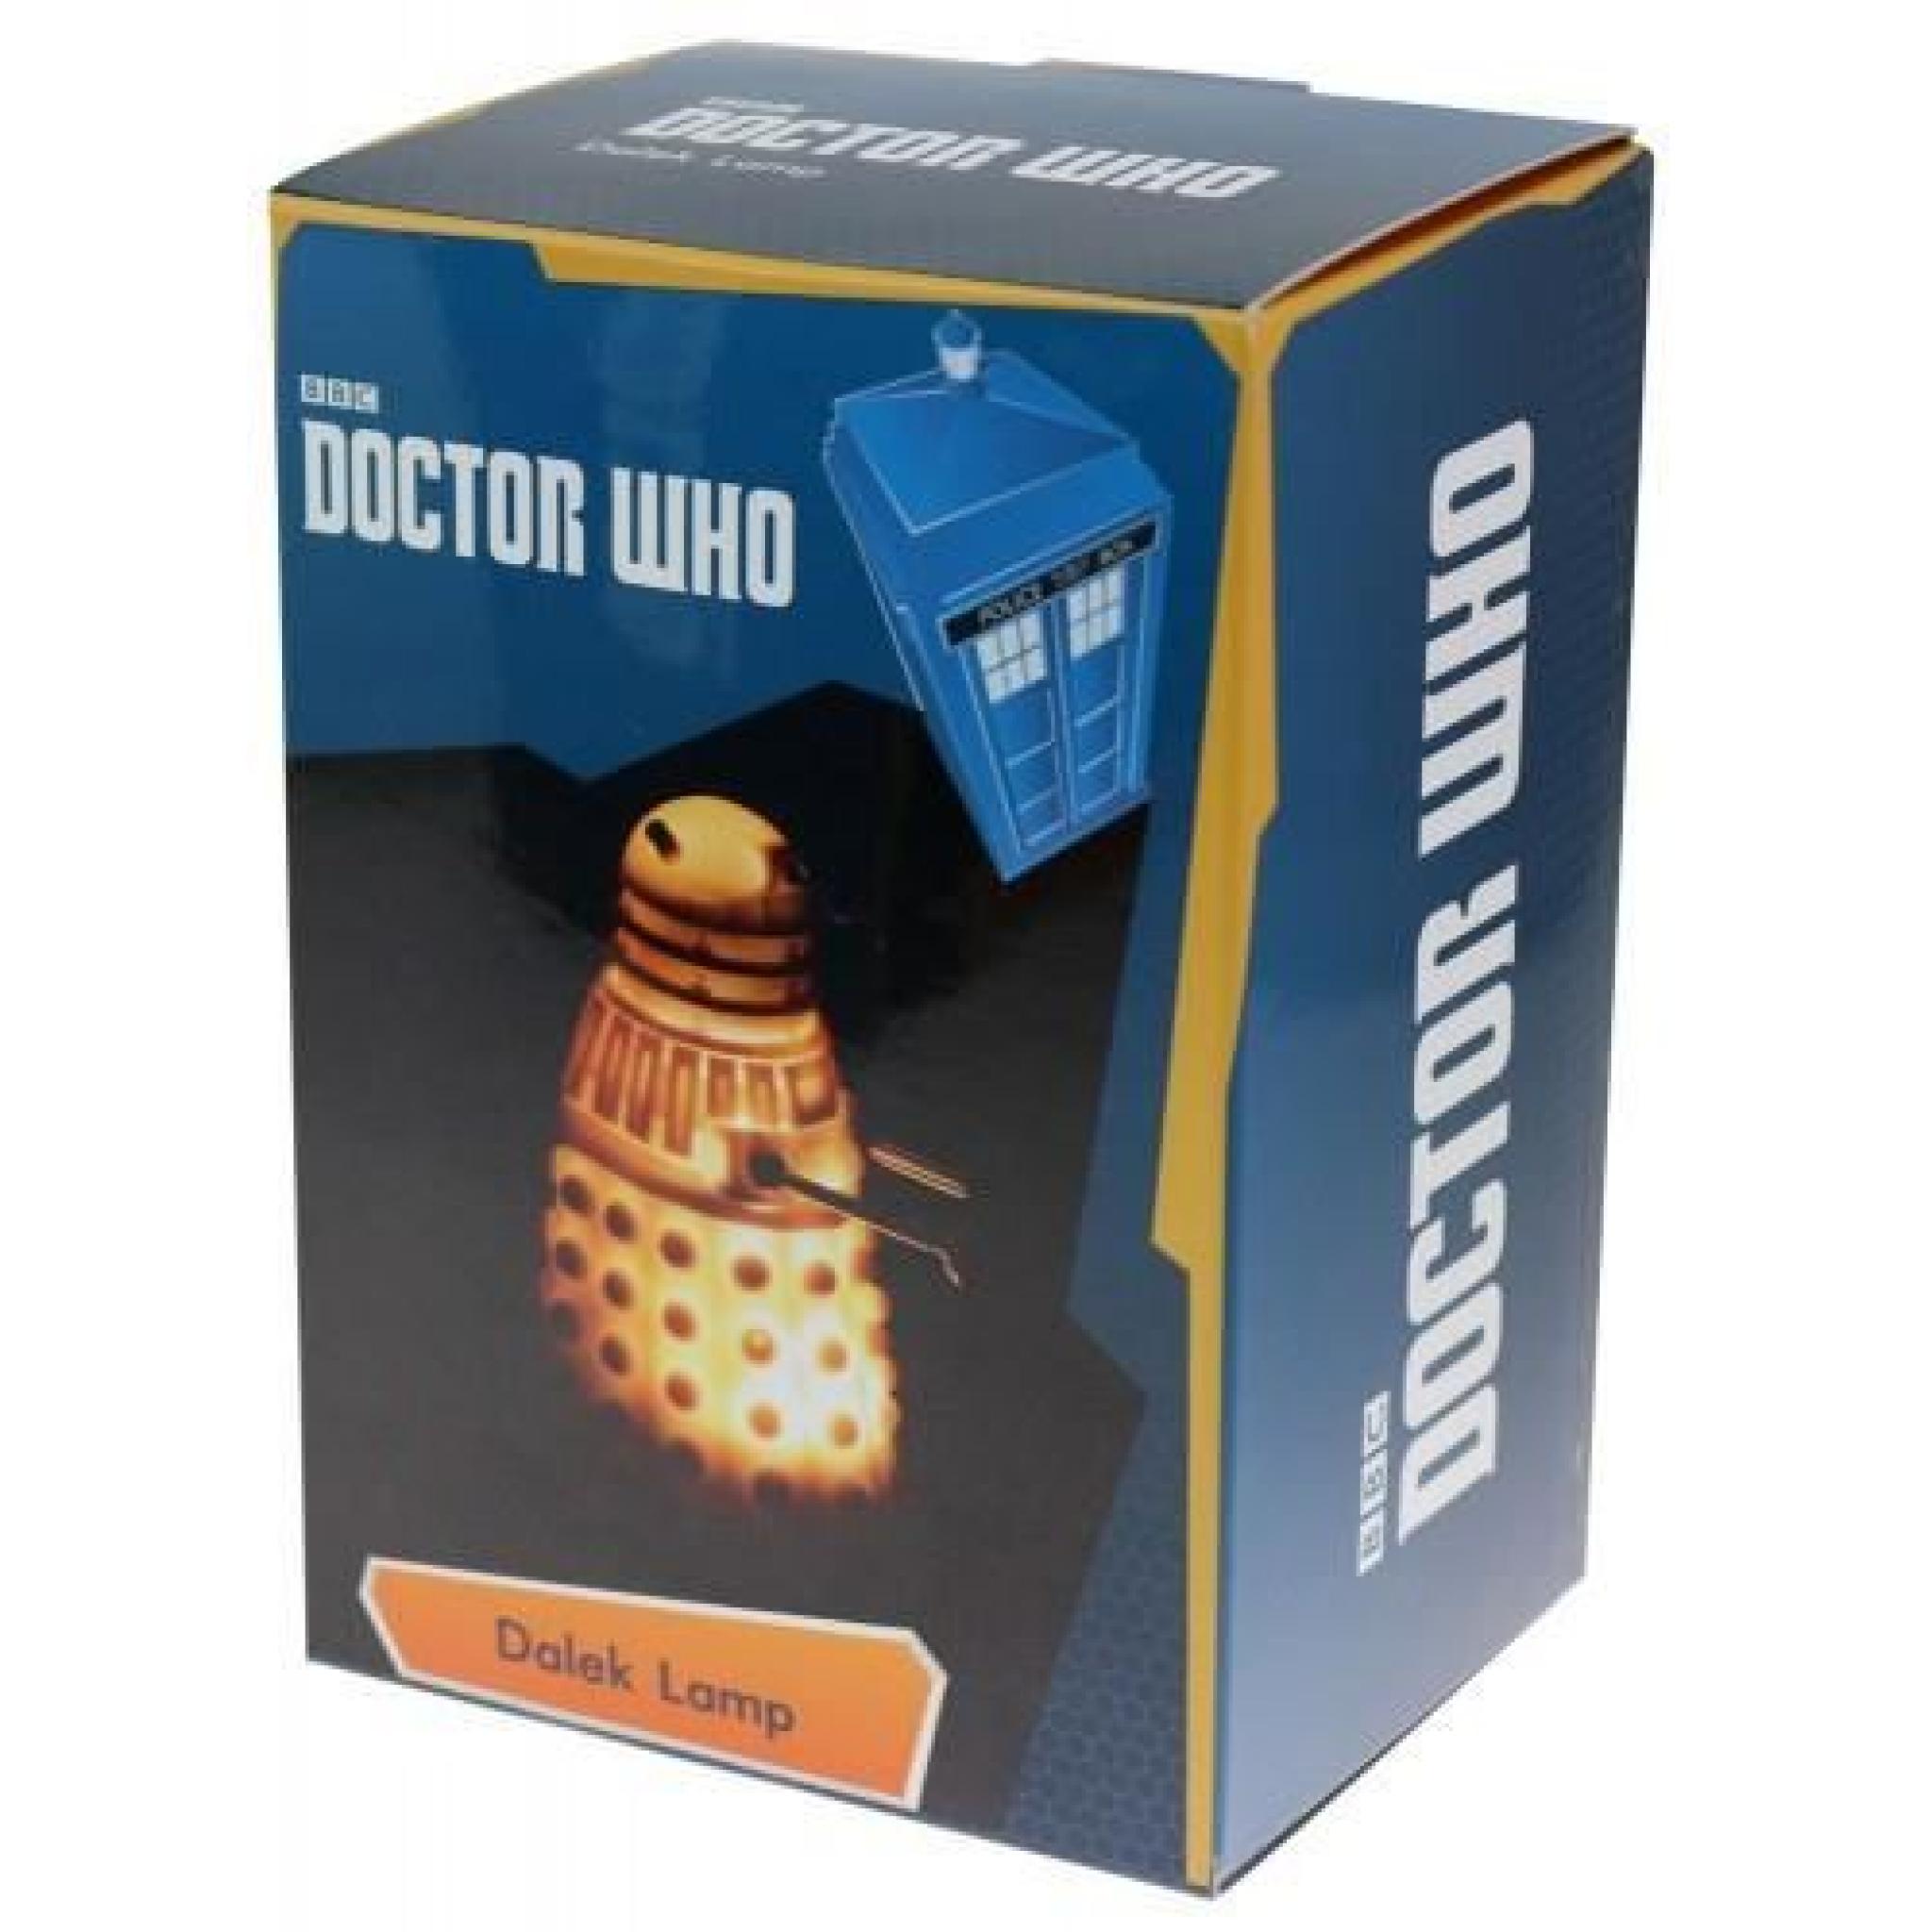 Lampe Doctor Who Dalek pas cher